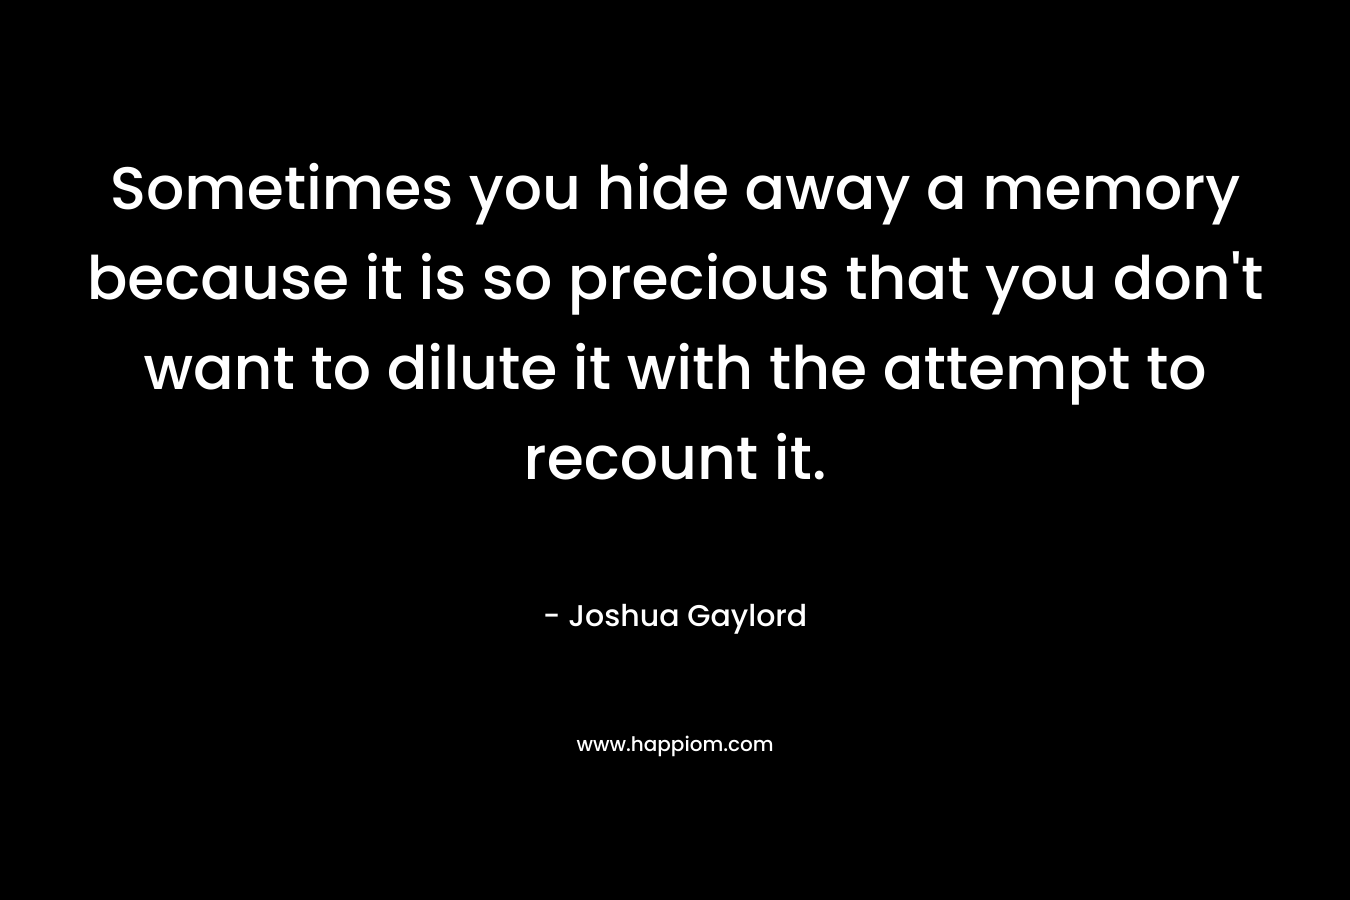 Sometimes you hide away a memory because it is so precious that you don’t want to dilute it with the attempt to recount it. – Joshua Gaylord